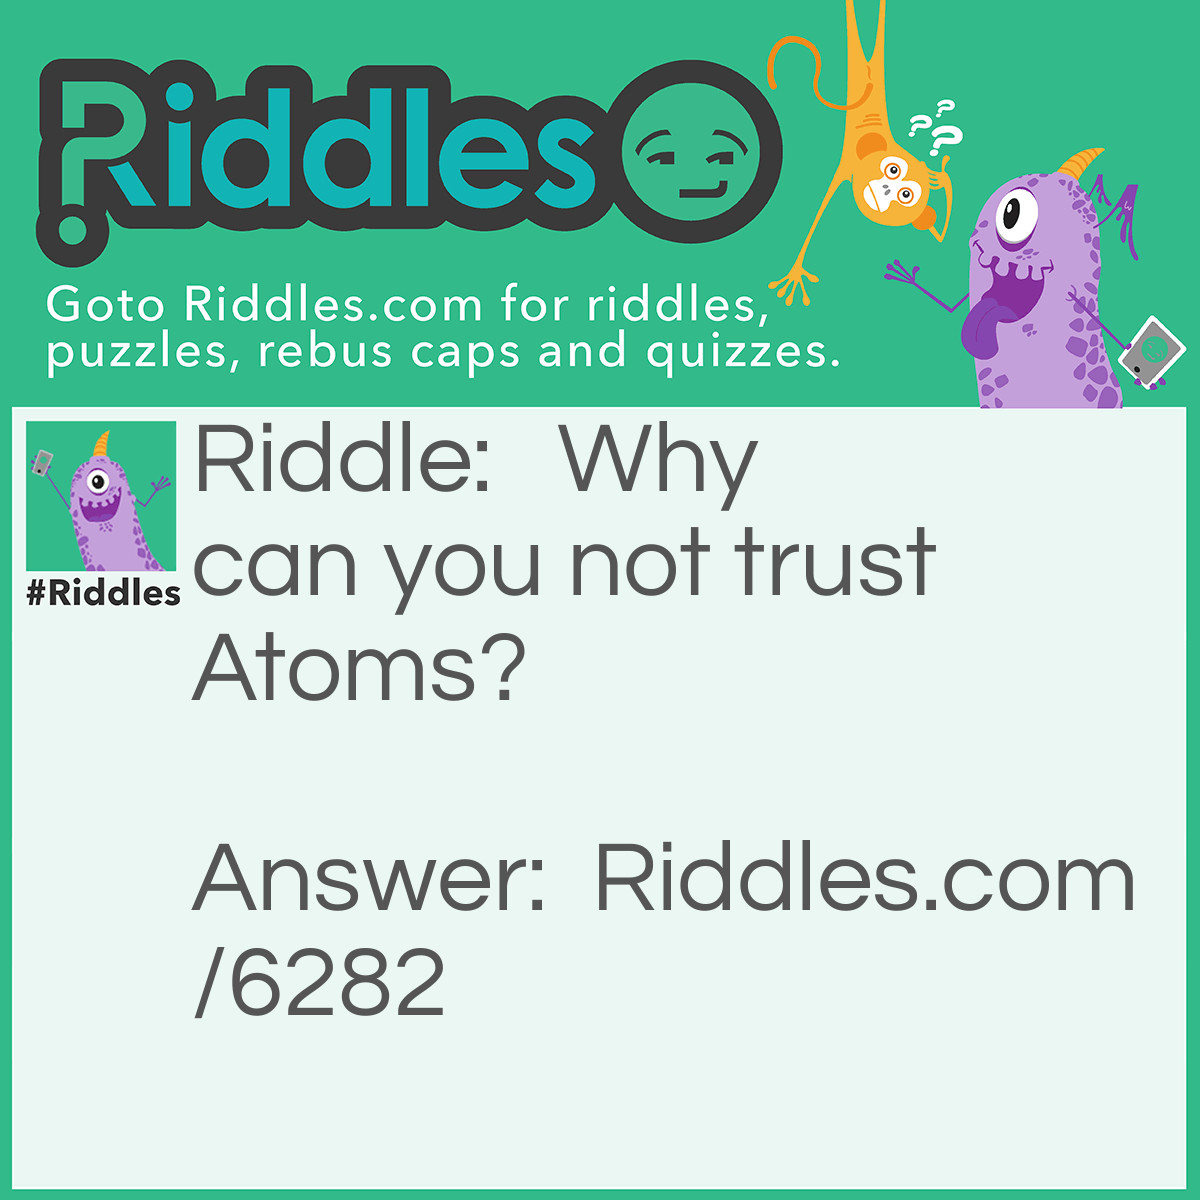 Riddle:  Why can you not trust Atoms? Answer: Because they make up everything.